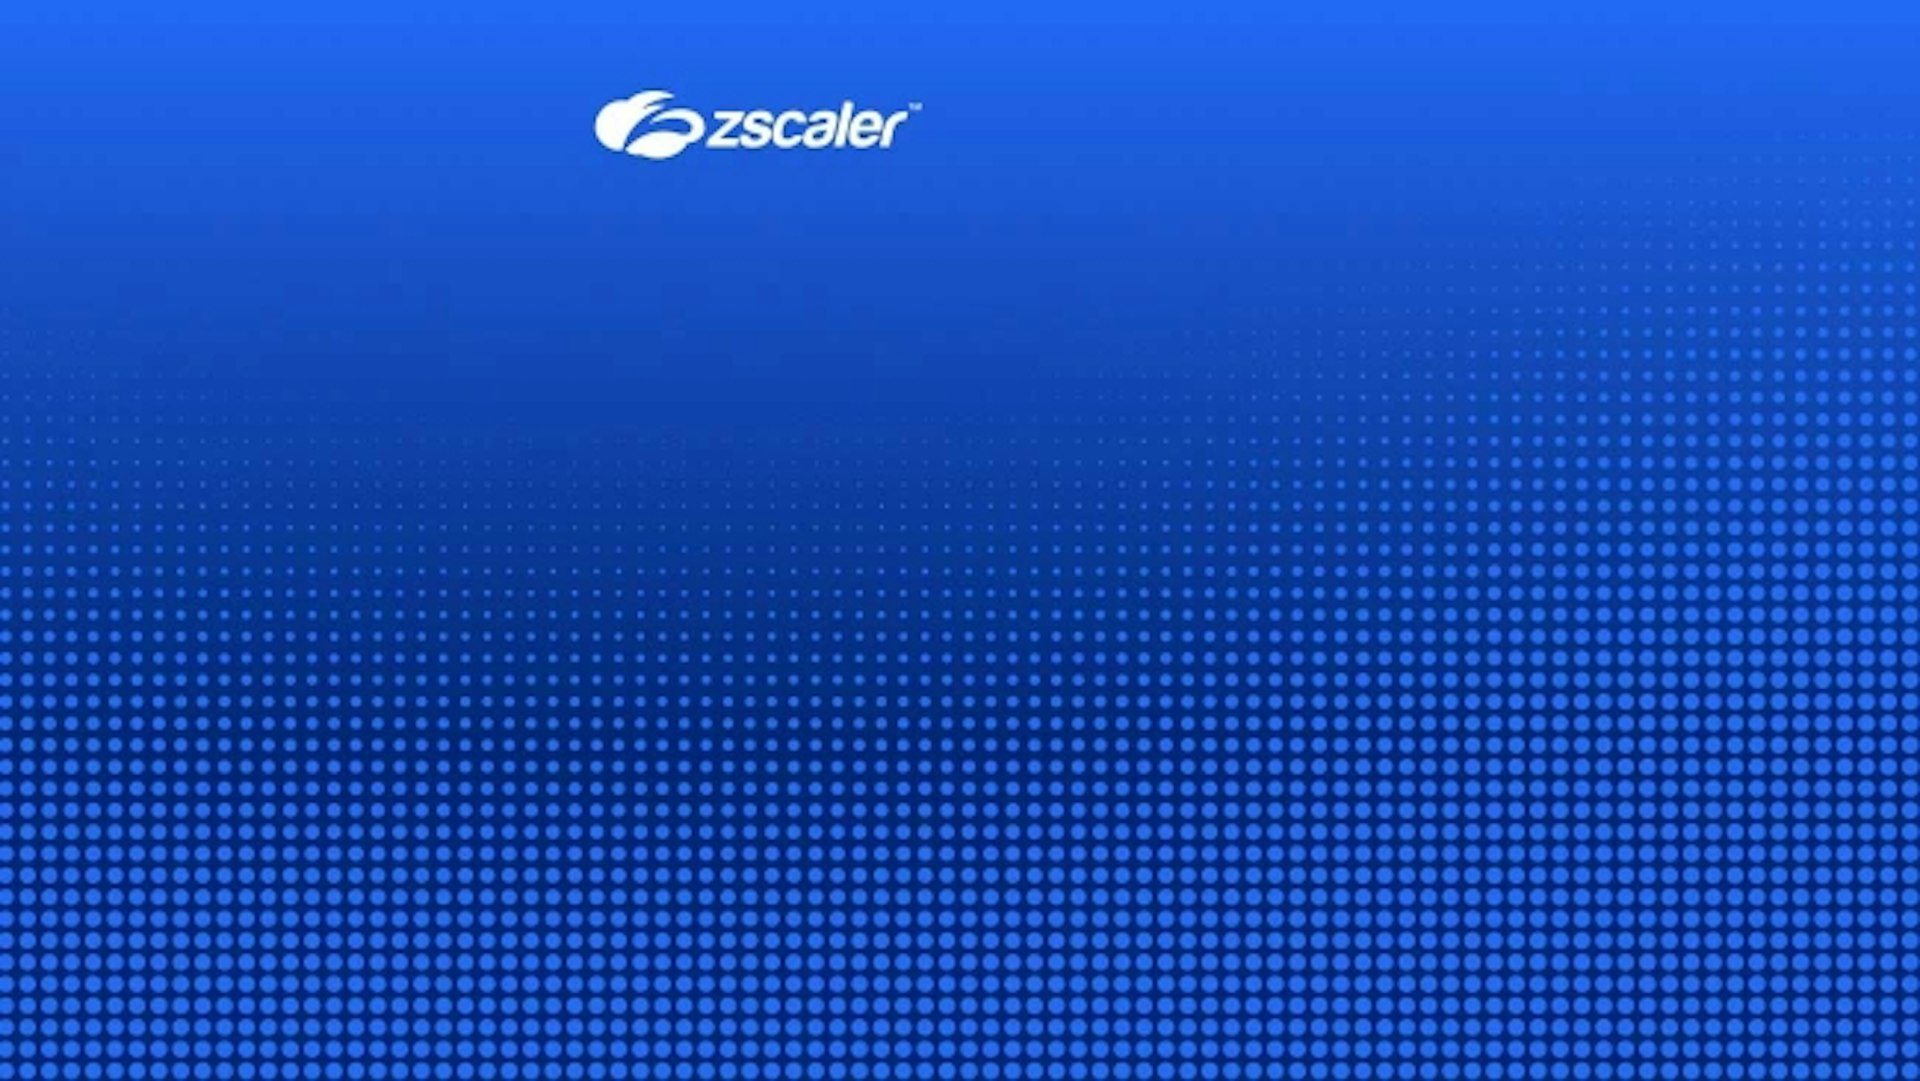 Panoramica su Zscaler Business Insights